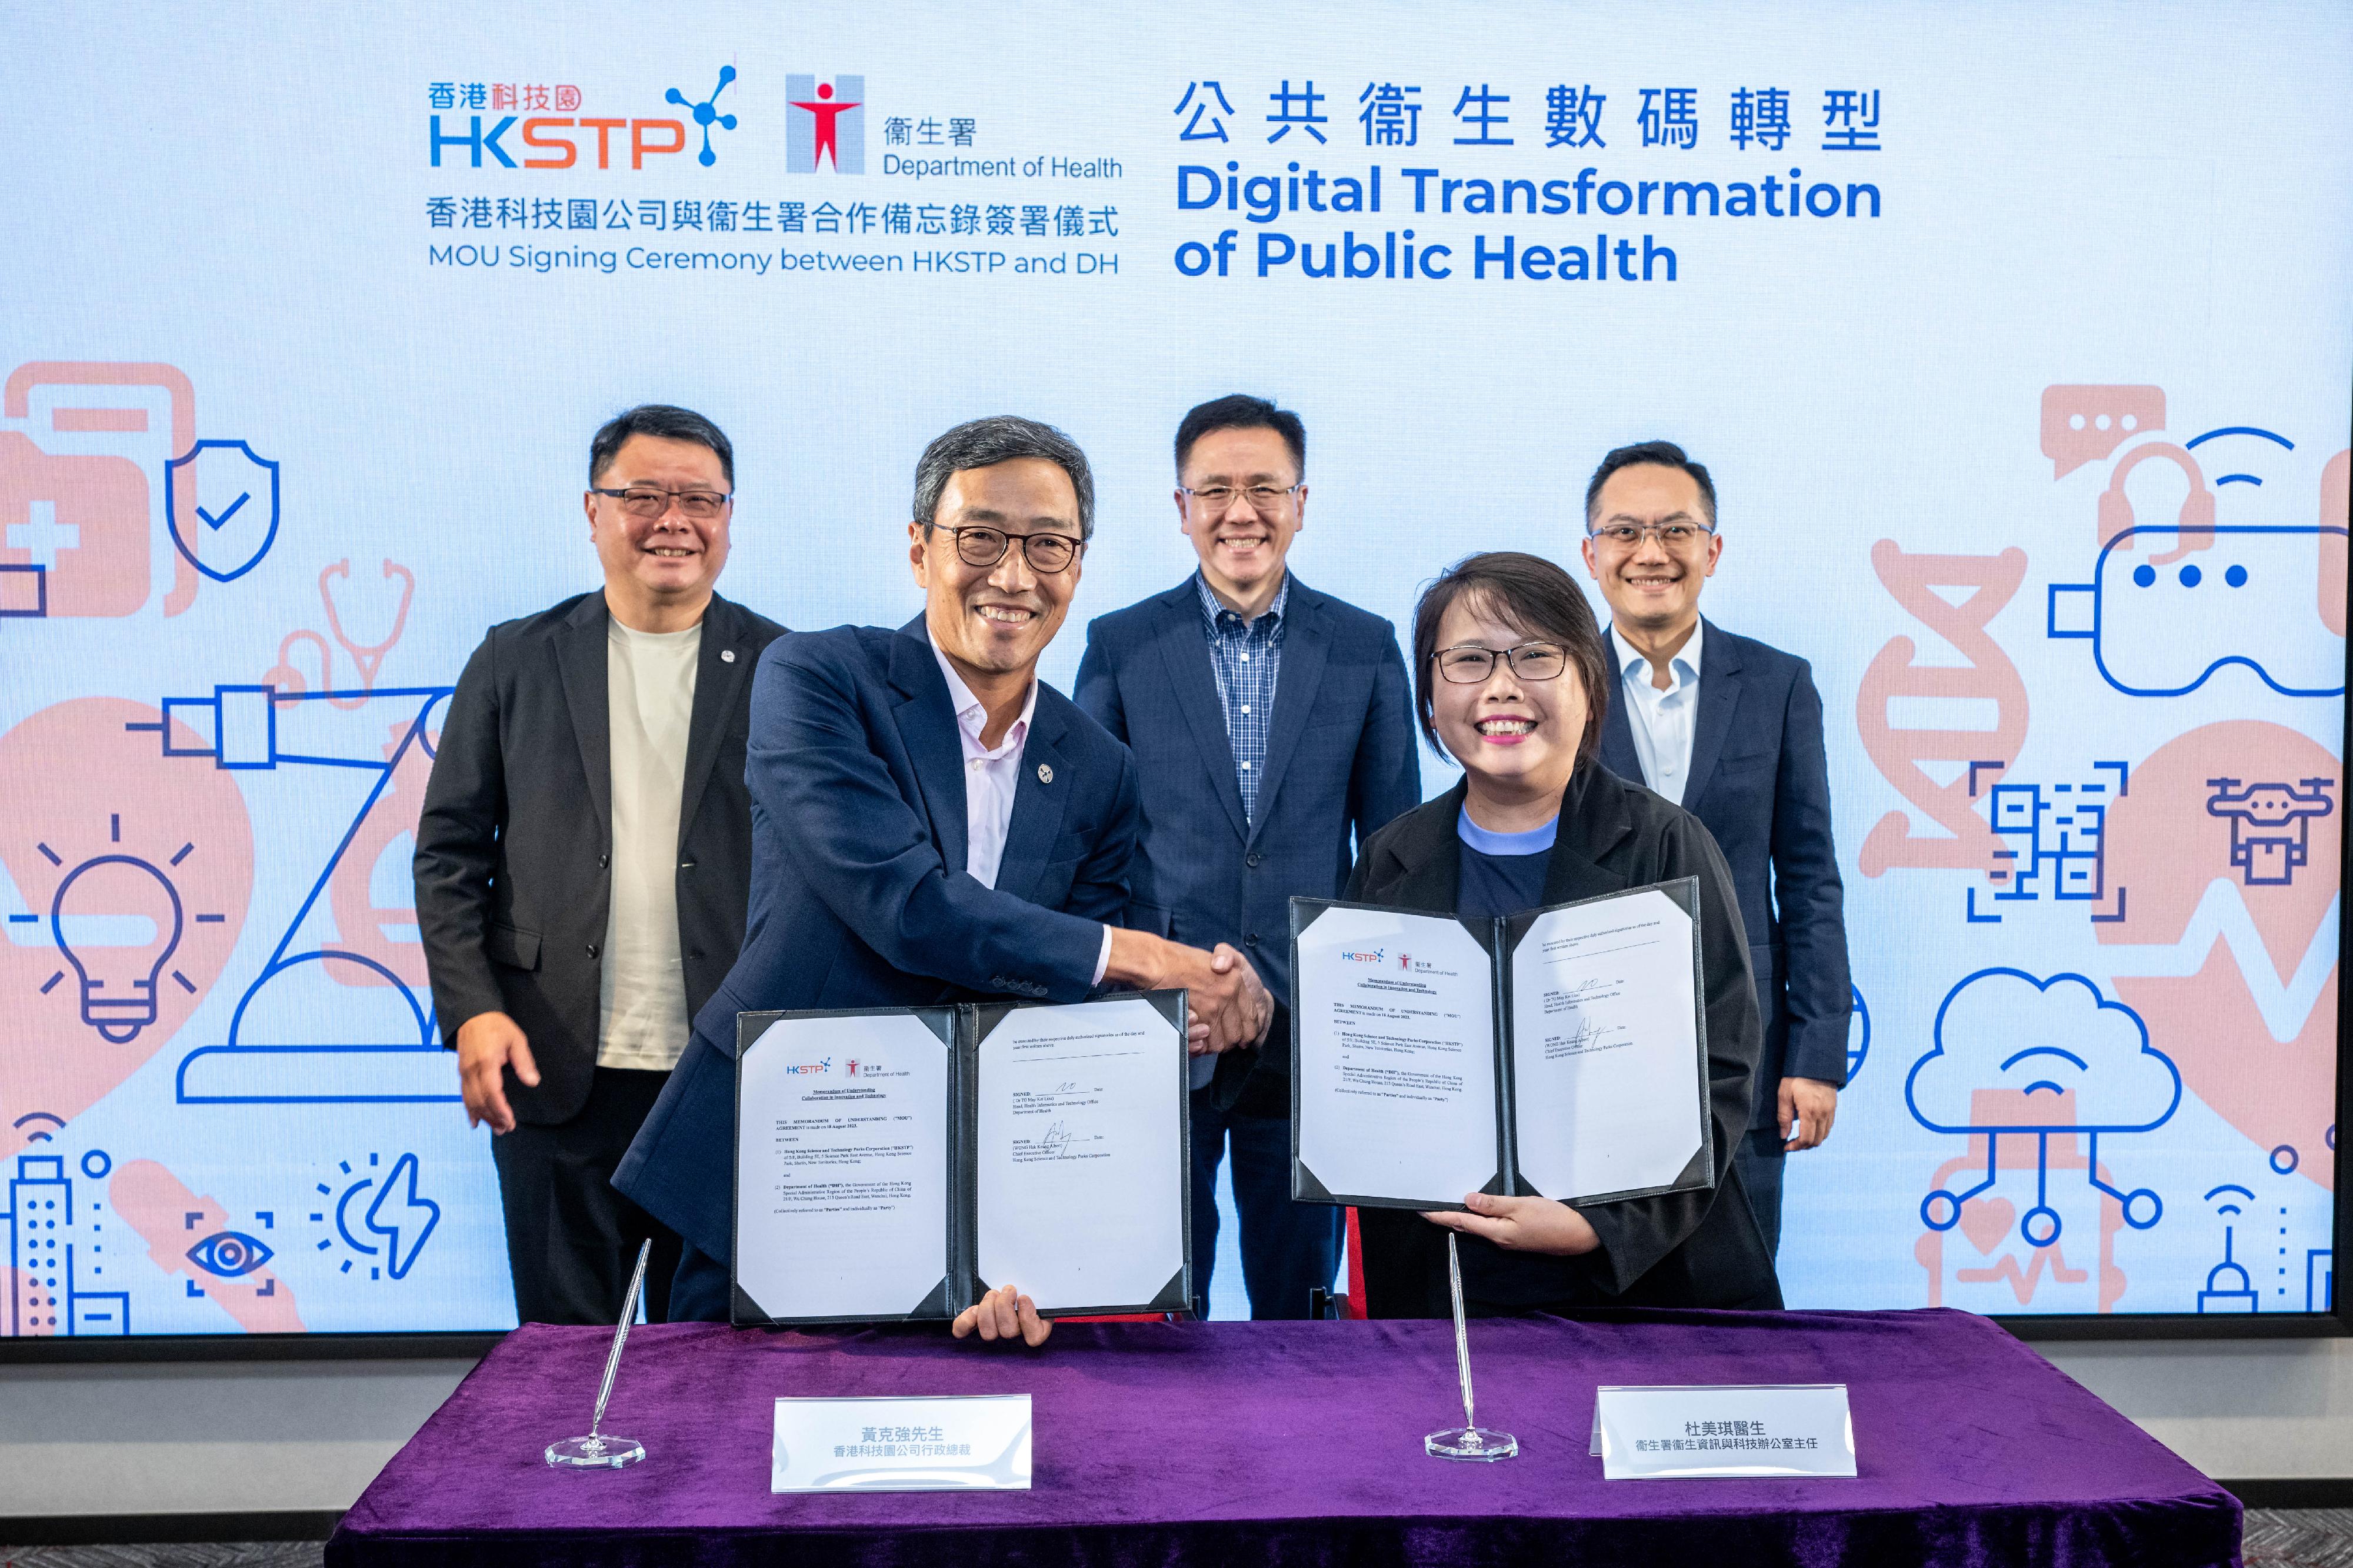 The Department of Health (DH) and the Hong Kong Science and Technology Parks Corporation (HKSTP) signed a Memorandum of Understanding (MOU) today (August 18) which aims at leveraging the latest innovation and technology to expedite digitalisation for public health functions while fostering an innovation-driven culture in the healthcare sector. Witnessed by the Secretary for Innovation, Technology and Industry, Professor Sun Dong (back row, centre); the Director of Health, Dr Ronald Lam (back row, right); and the Chairman of the HKSTP, Dr Sunny Chai (back row, left), the MOU was signed by the Head, Health Informatics and Technology Office of the DH, Dr Liza To (front row, right), and the Chief Executive Officer of the HKSTP, Mr Albert Wong (front row, left).